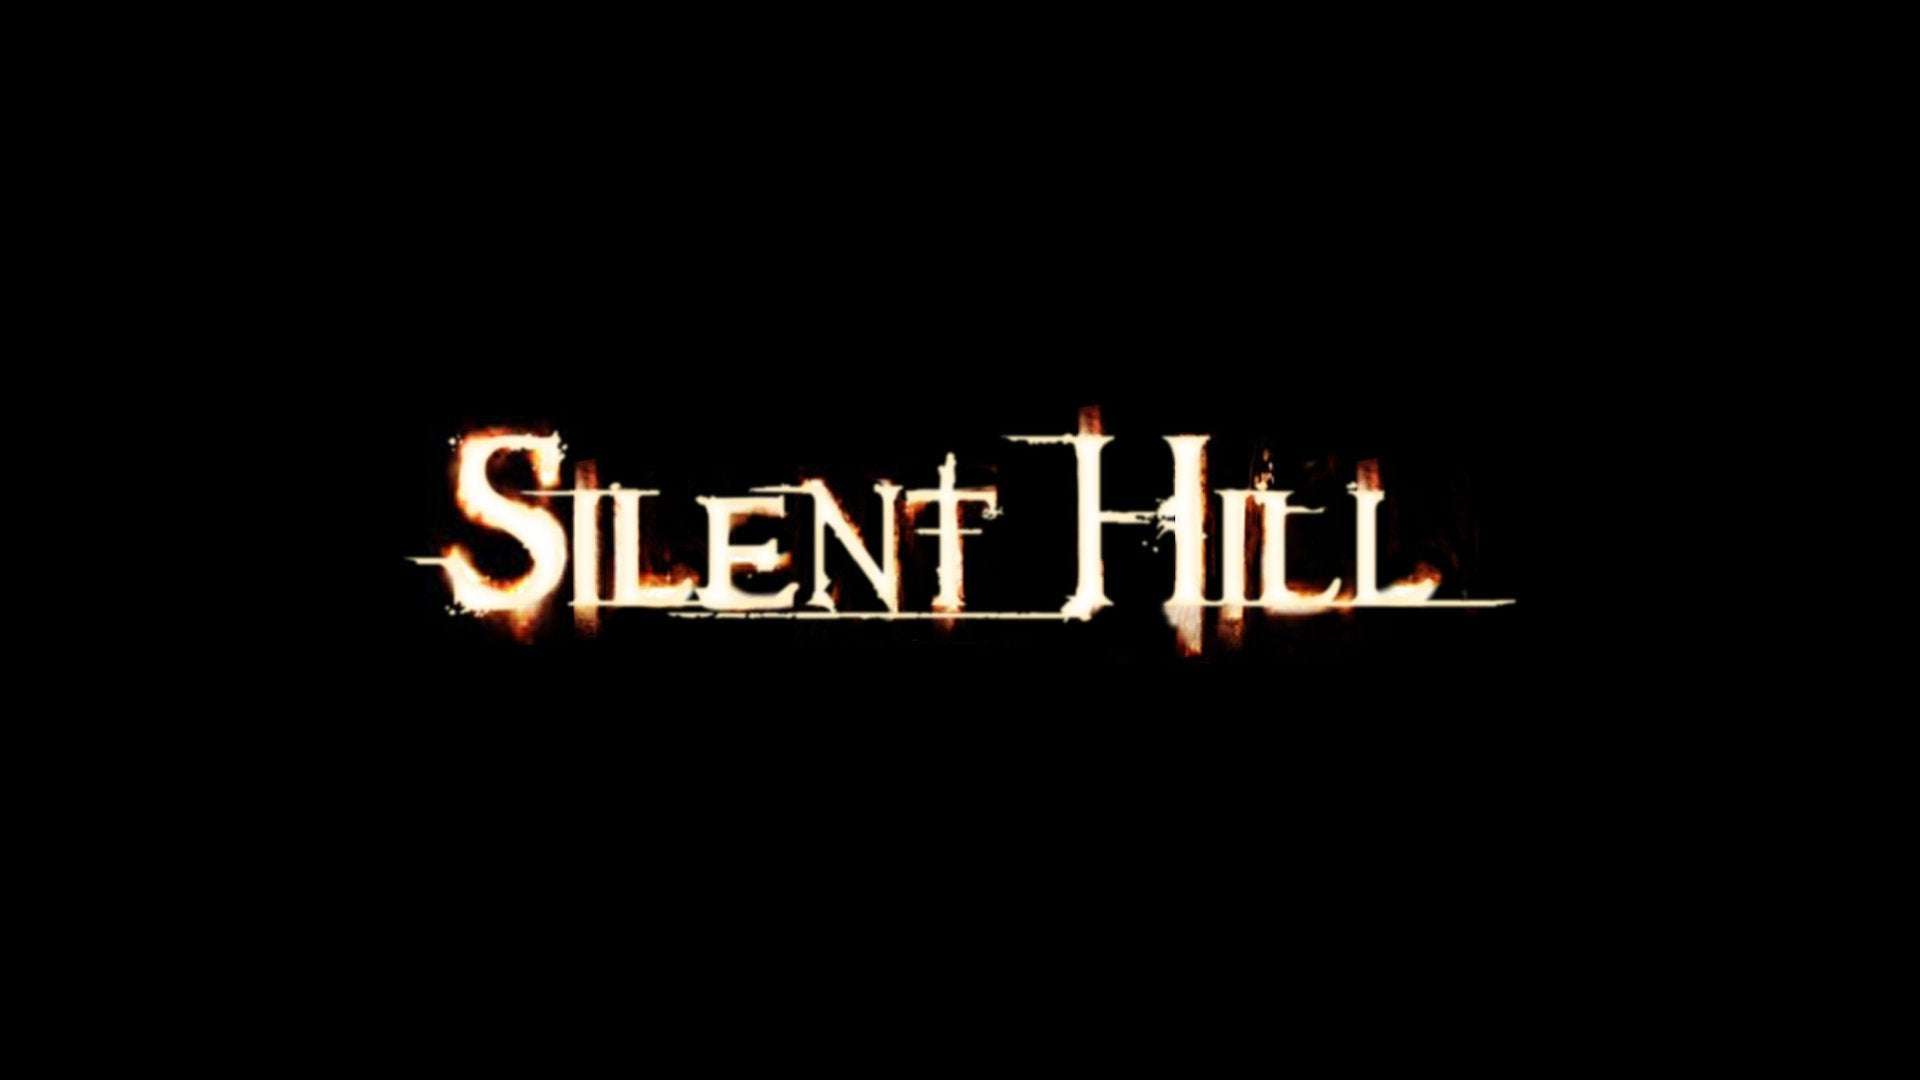 image for Silent Hill 2 Remake and New Silent Hill Game Leaked Through Official YouTube Video